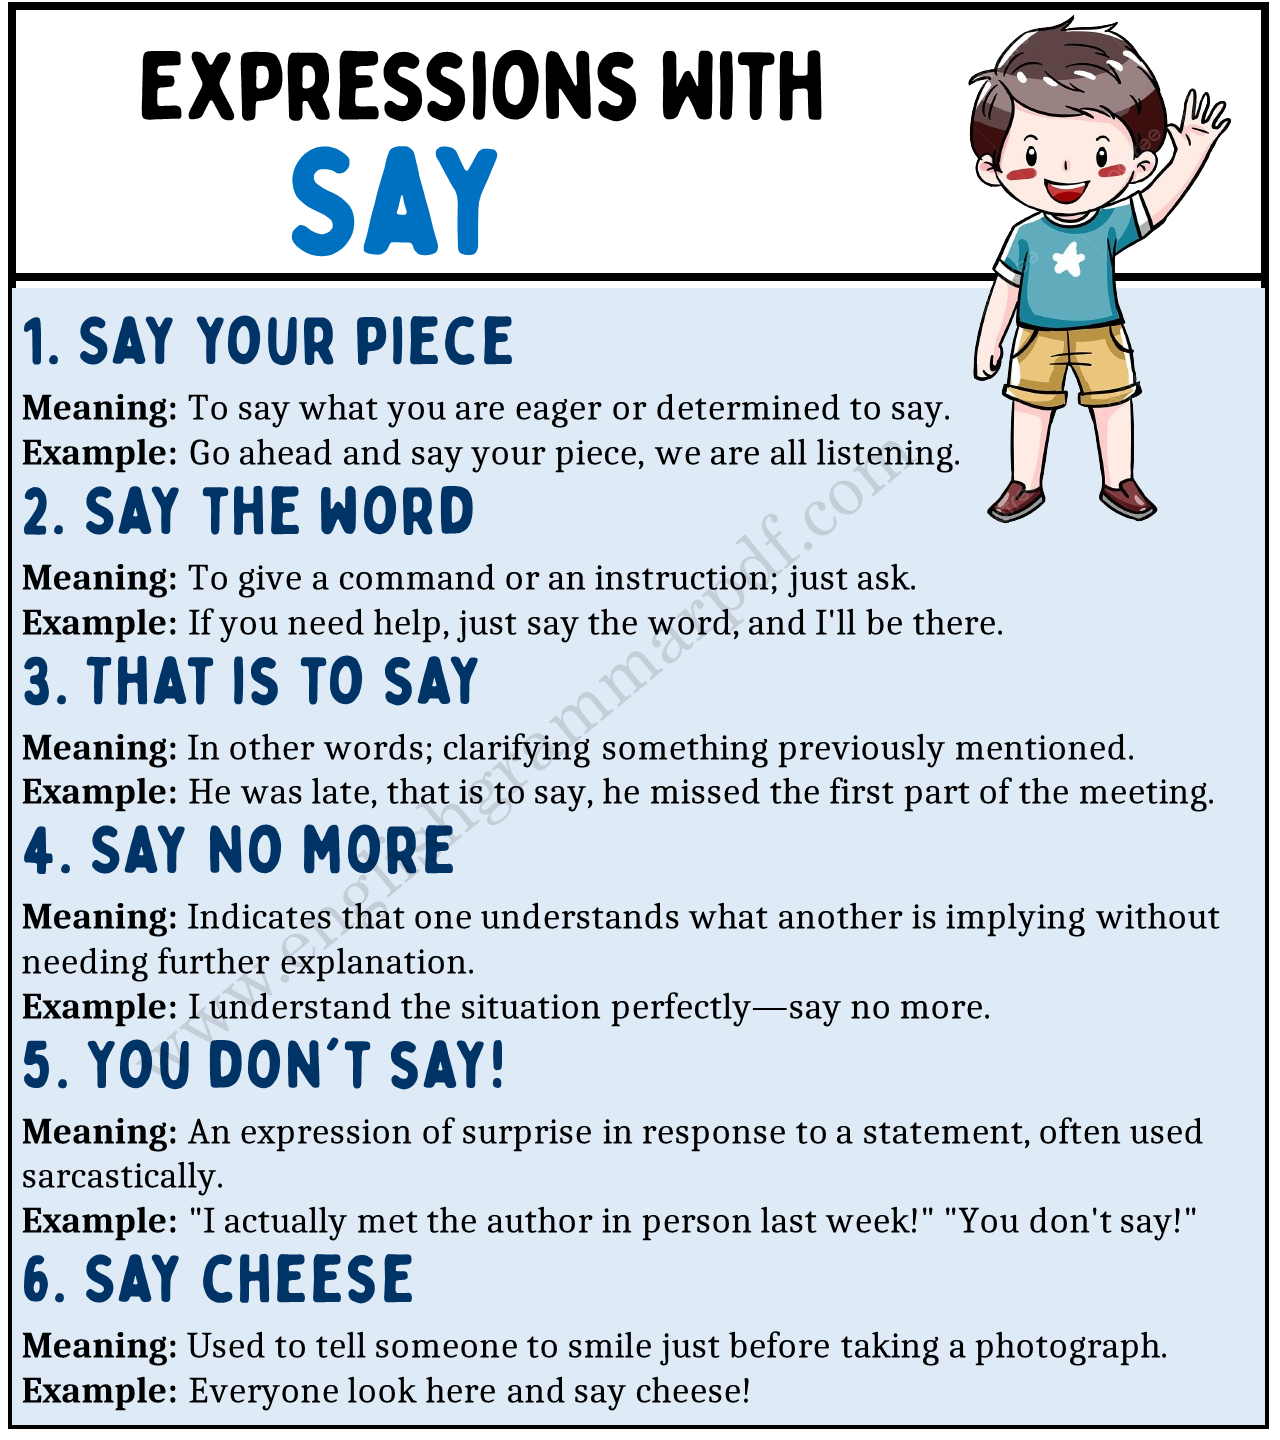 Expressions with “Say”